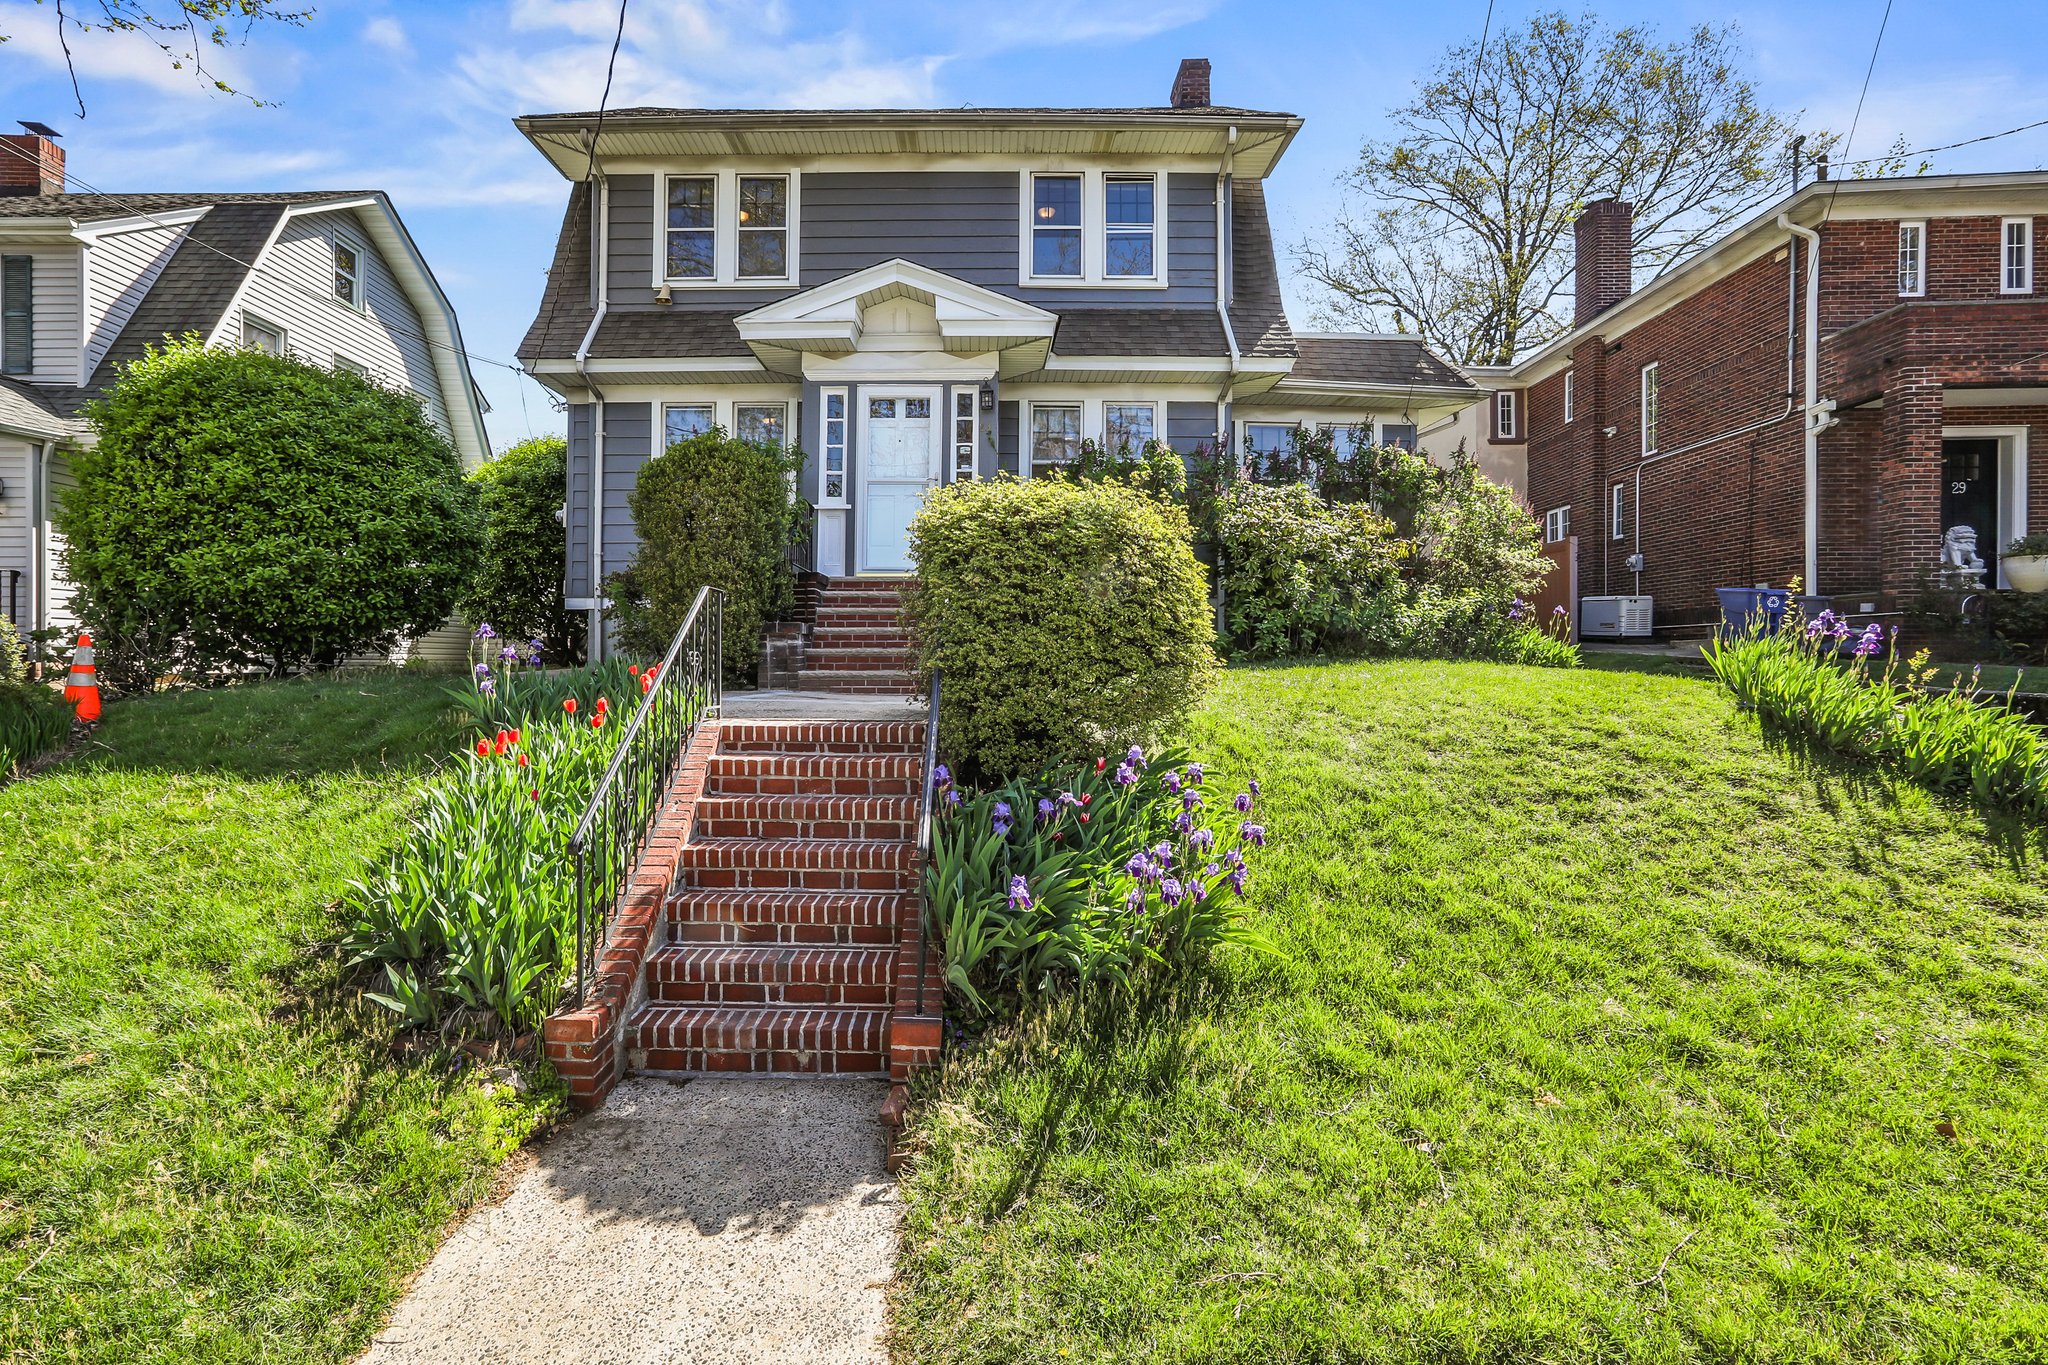 4 bedroom colonial for sale in Staten Island New York